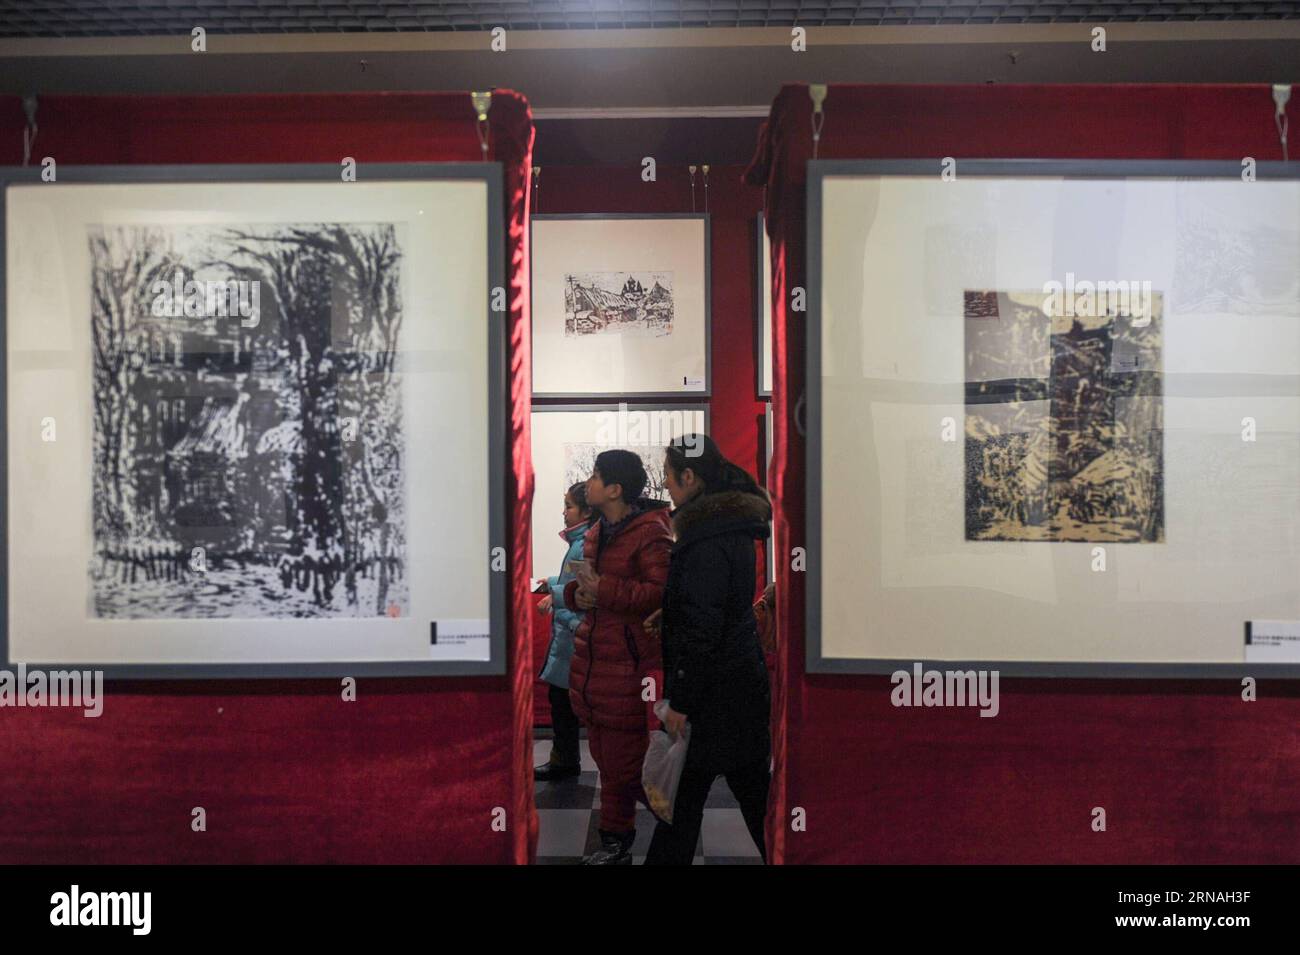 (160126) -- HARBIN, Jan. 26, 2016 -- People visit an exhibition of ice engraving painting in Harbin, capital of northeast China s Heilongjiang Province, Jan. 26, 2016. The pictures on display were printed from engraved ice slabs, according to artist Zhu Xiaodong. He said each ice slab was able to print out some 20 pages yielding variant results as the ice melted down. ) (twy) CHINA-HARBIN-ICE-ENGRAVING PAINTING (CN) WangxSong PUBLICATIONxNOTxINxCHN   160126 Harbin Jan 26 2016 Celebrities Visit to Exhibition of ICE Engraving Painting in Harbin Capital of Northeast China S Heilongjiang Province Stock Photo